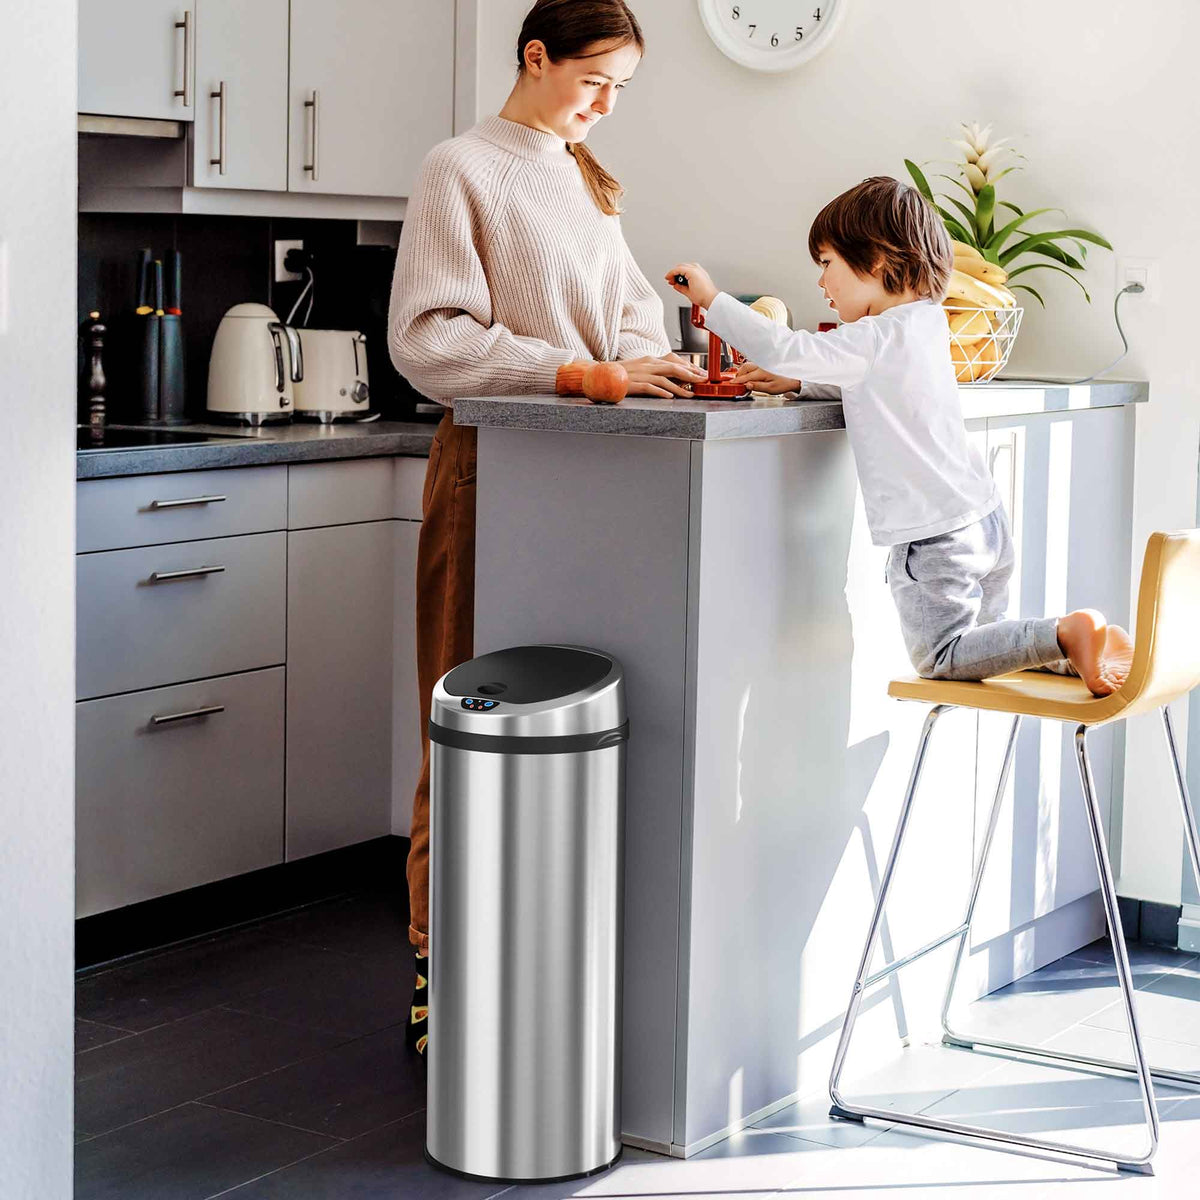 13 Gallon Round Sensor Trash Can – iTouchless Housewares and